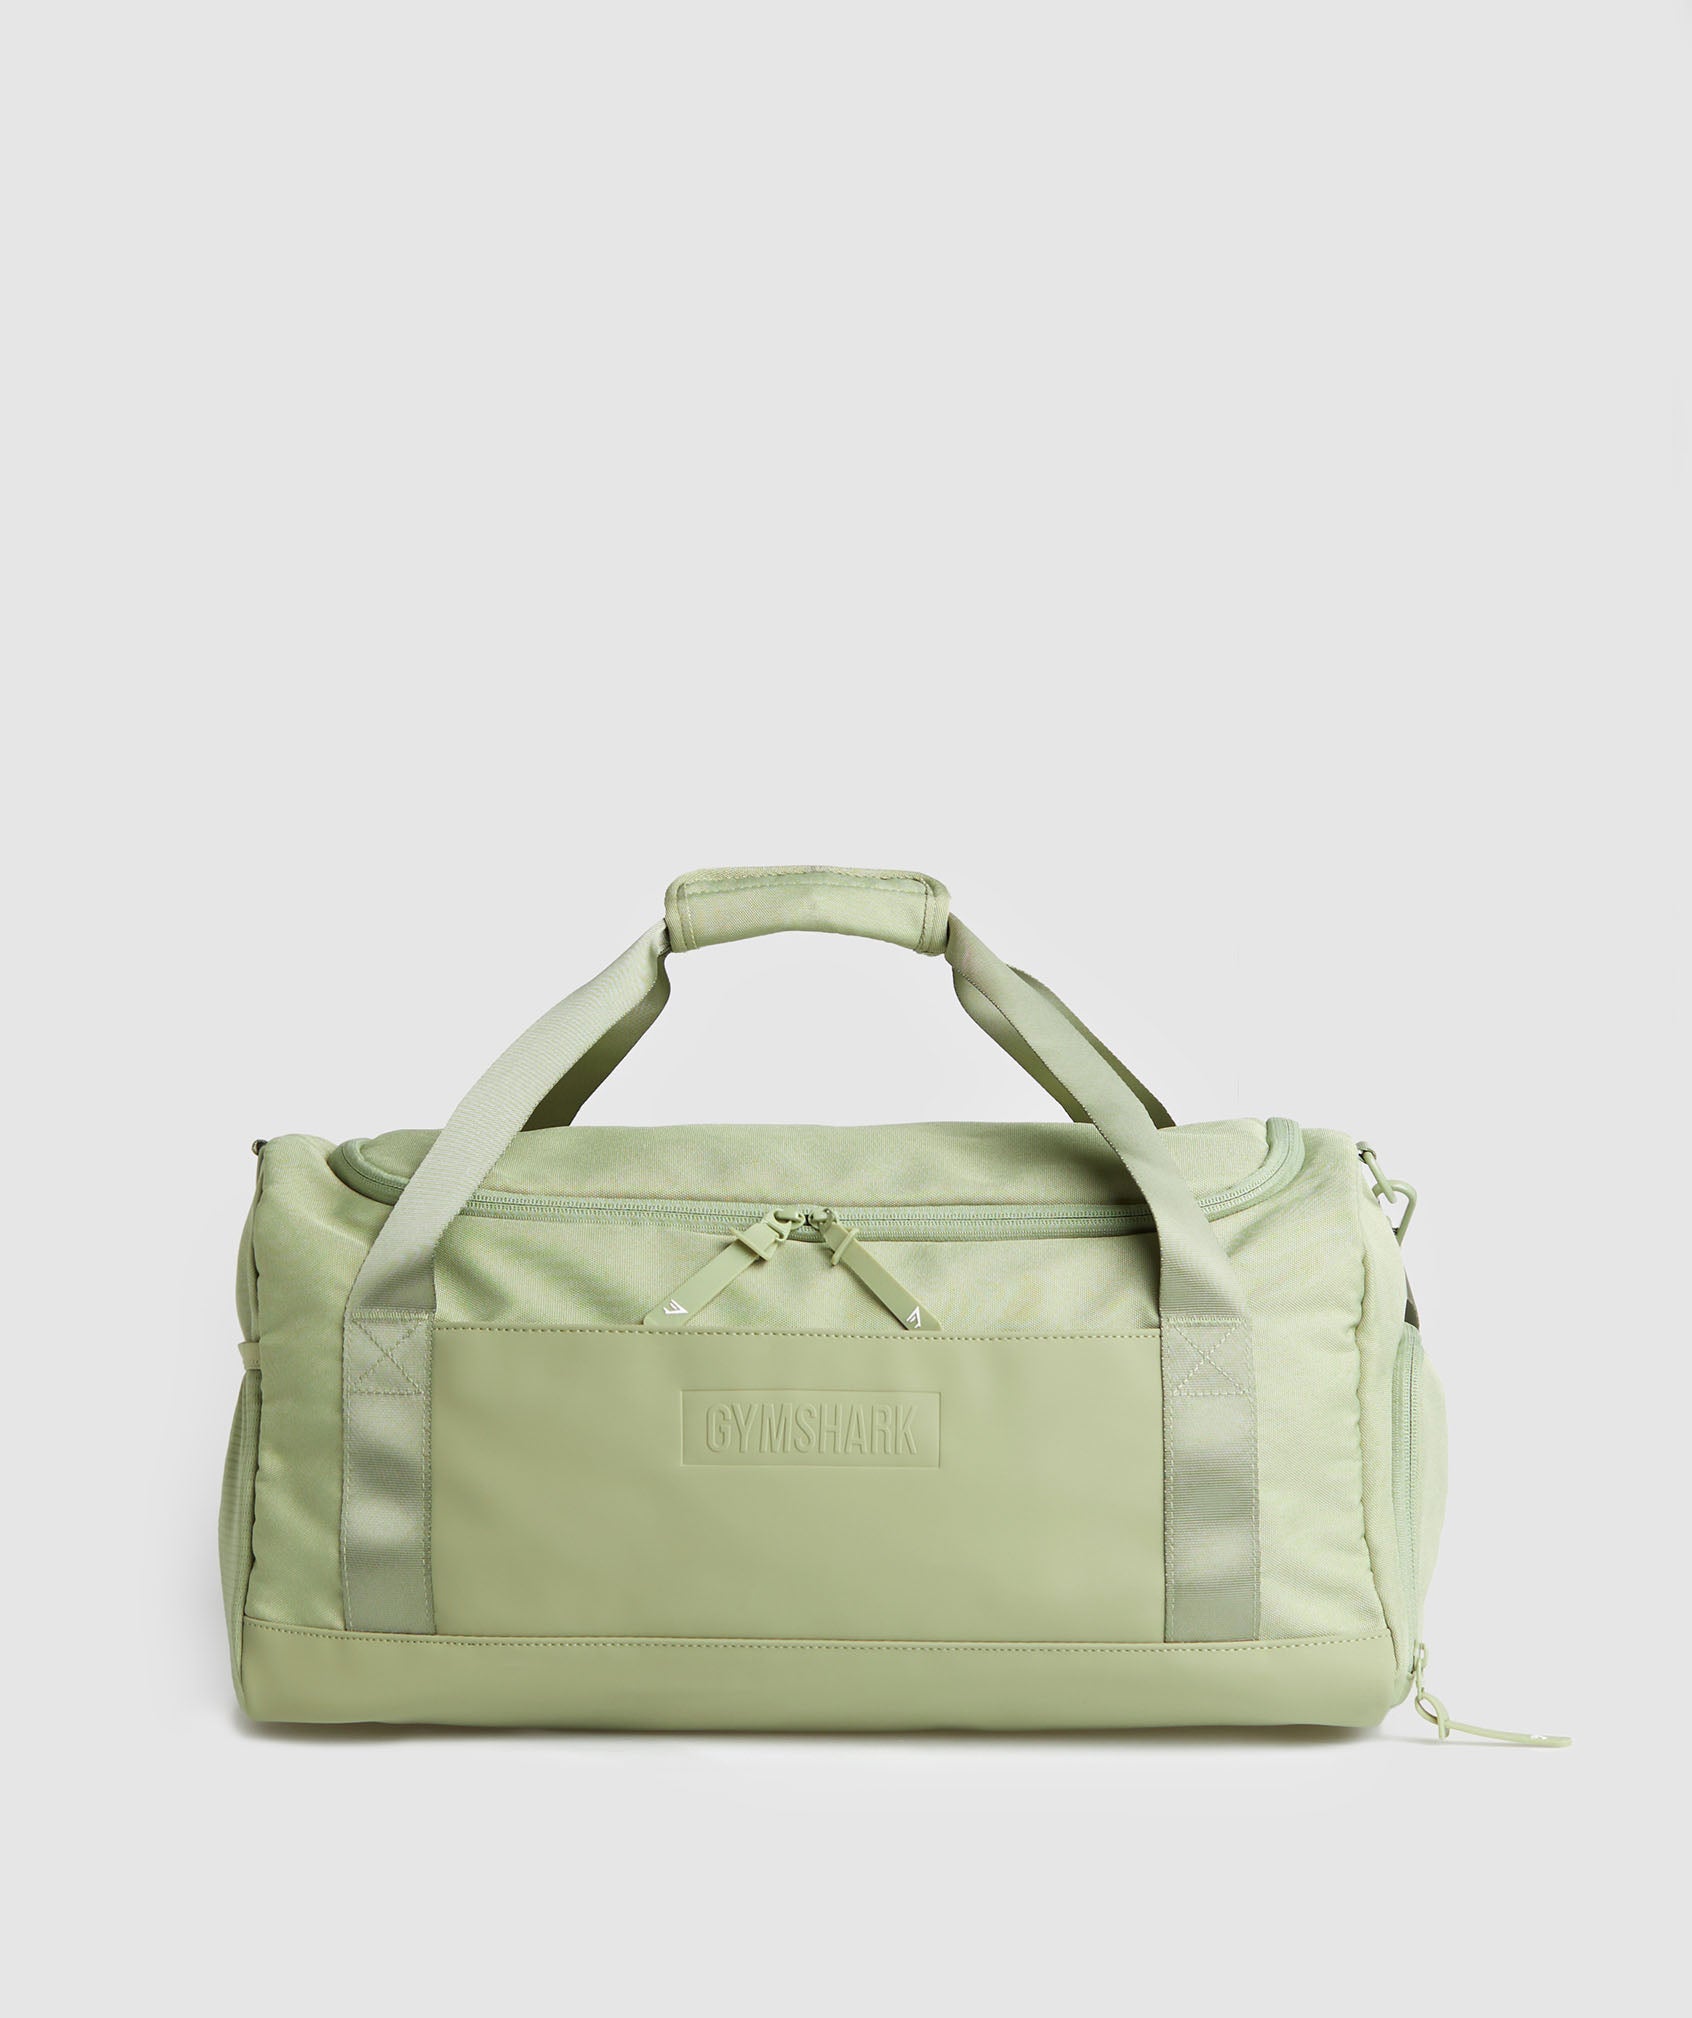 Everyday Gym Bag Small in Natural Sage Green is out of stock